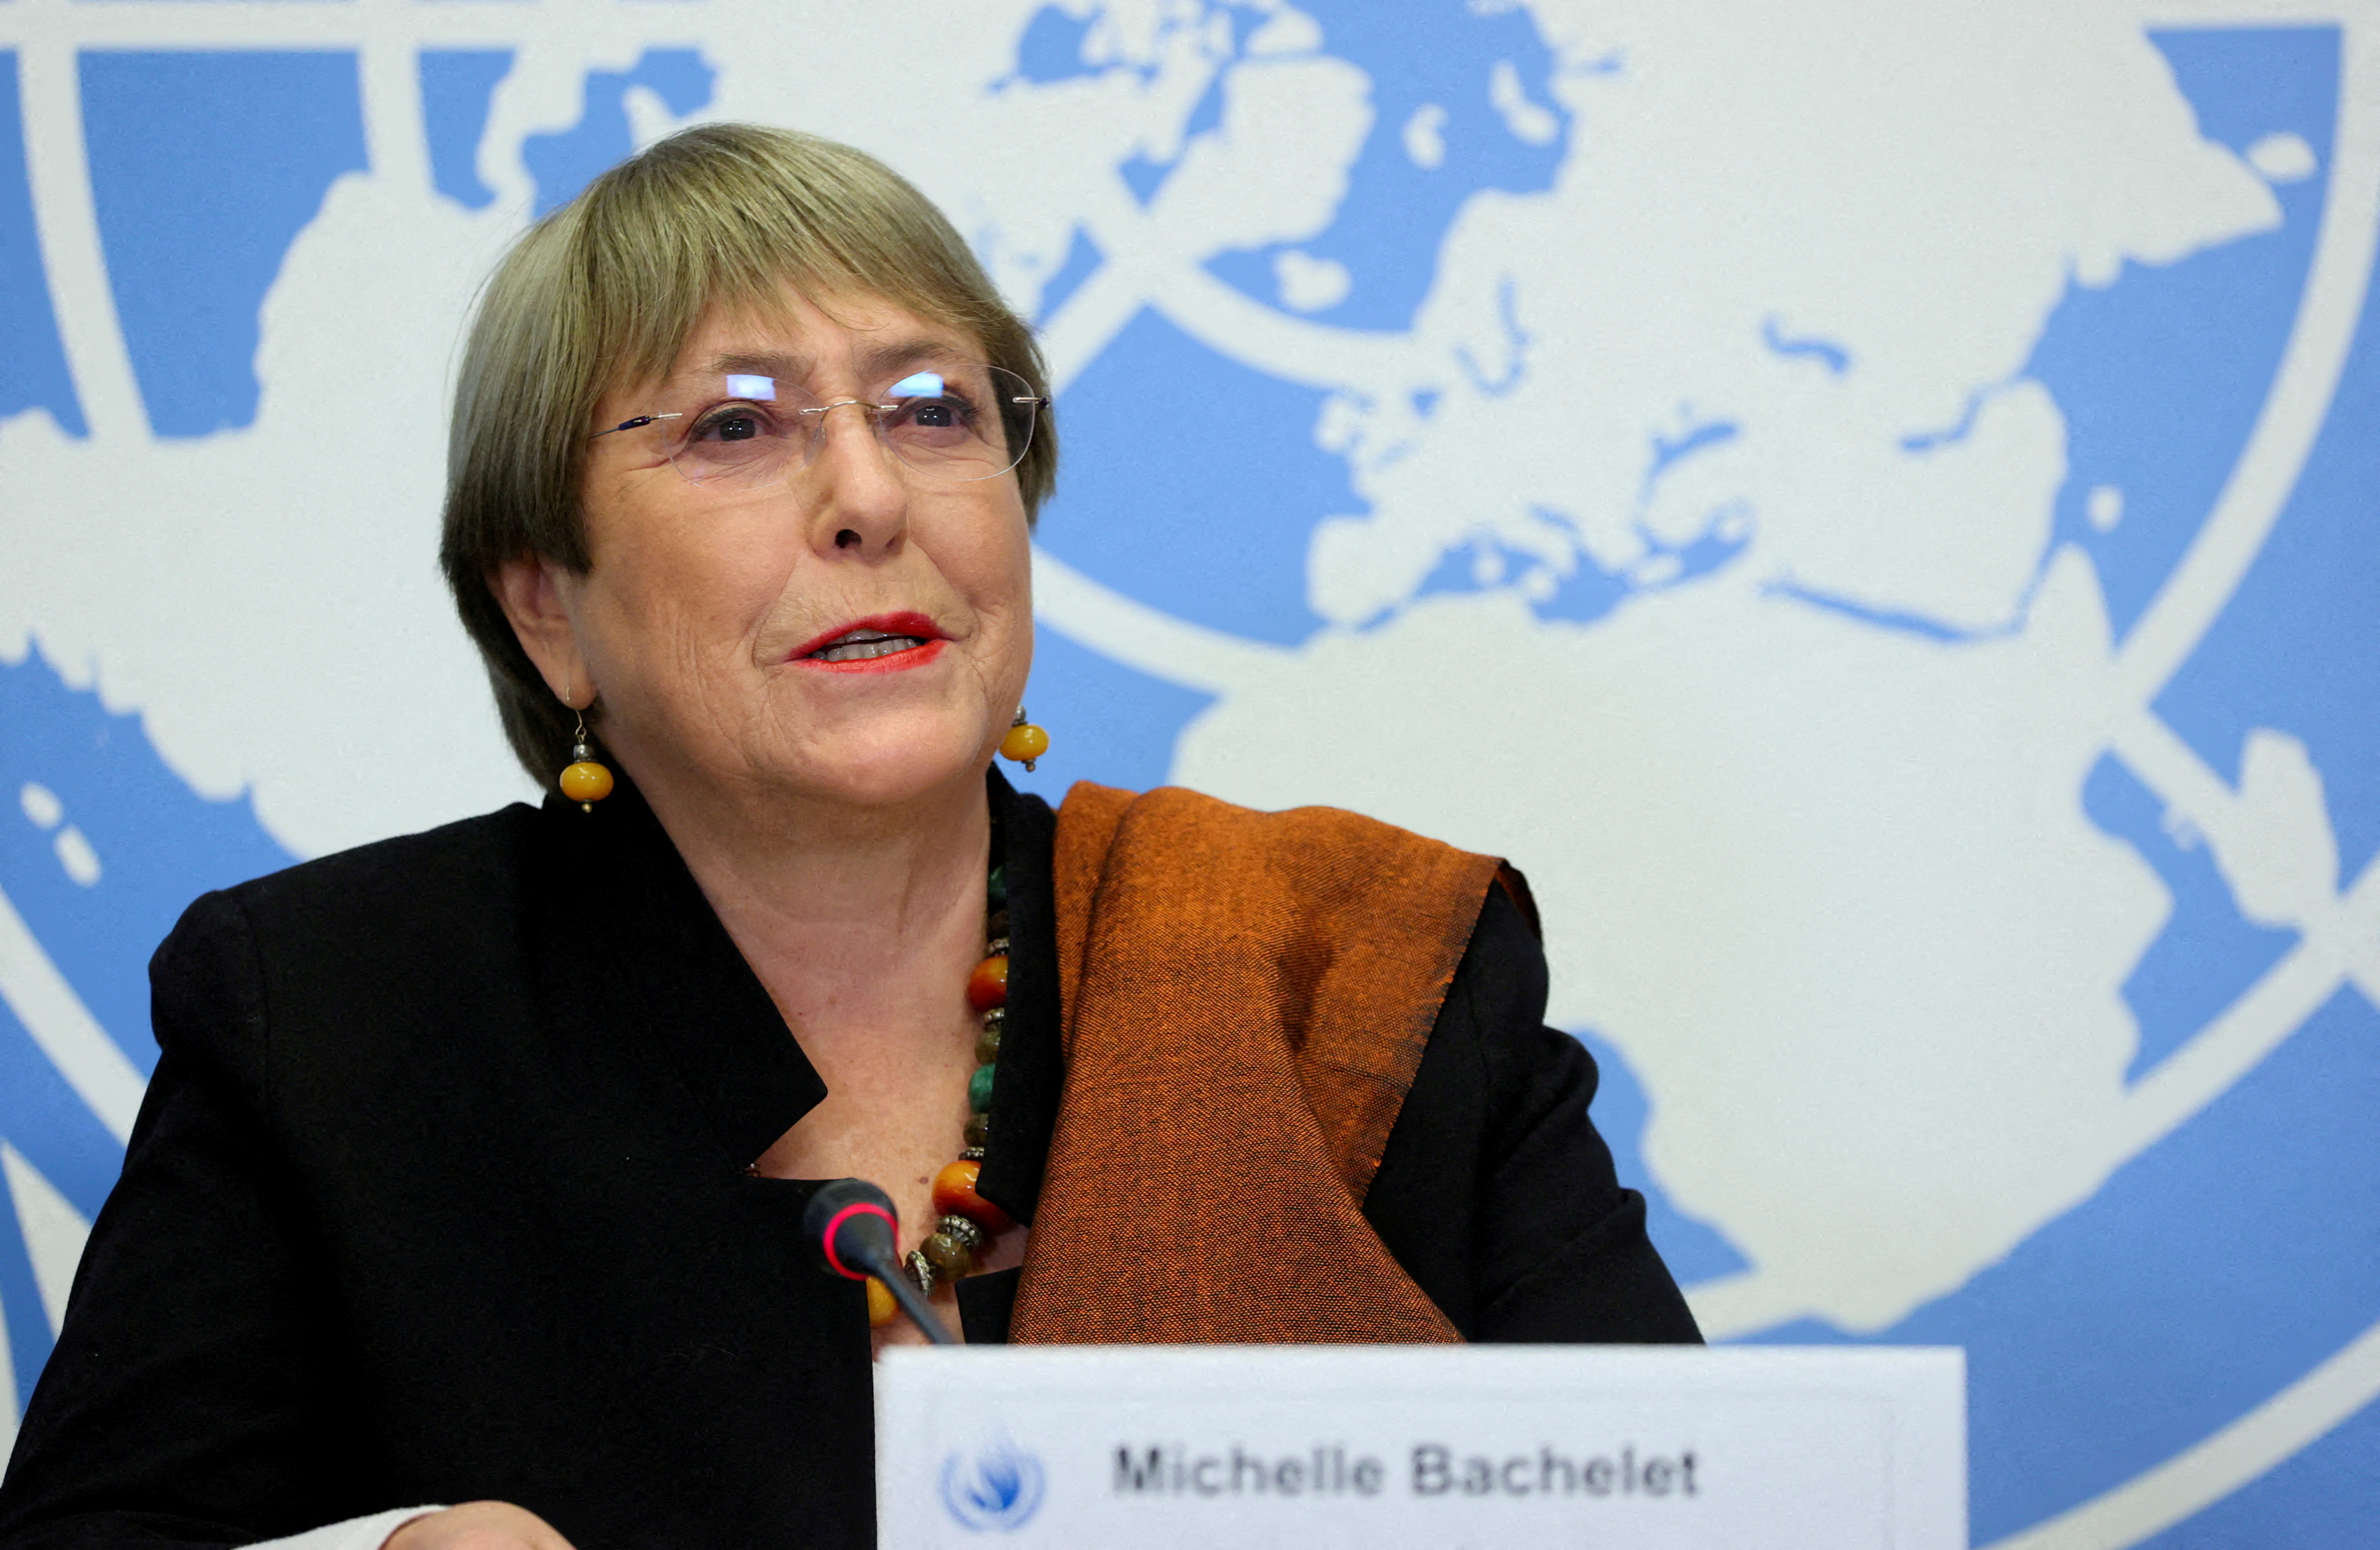 UN High Commissioner for Human Rights Michelle Bachelet attends  an event at the United Nations in Geneva